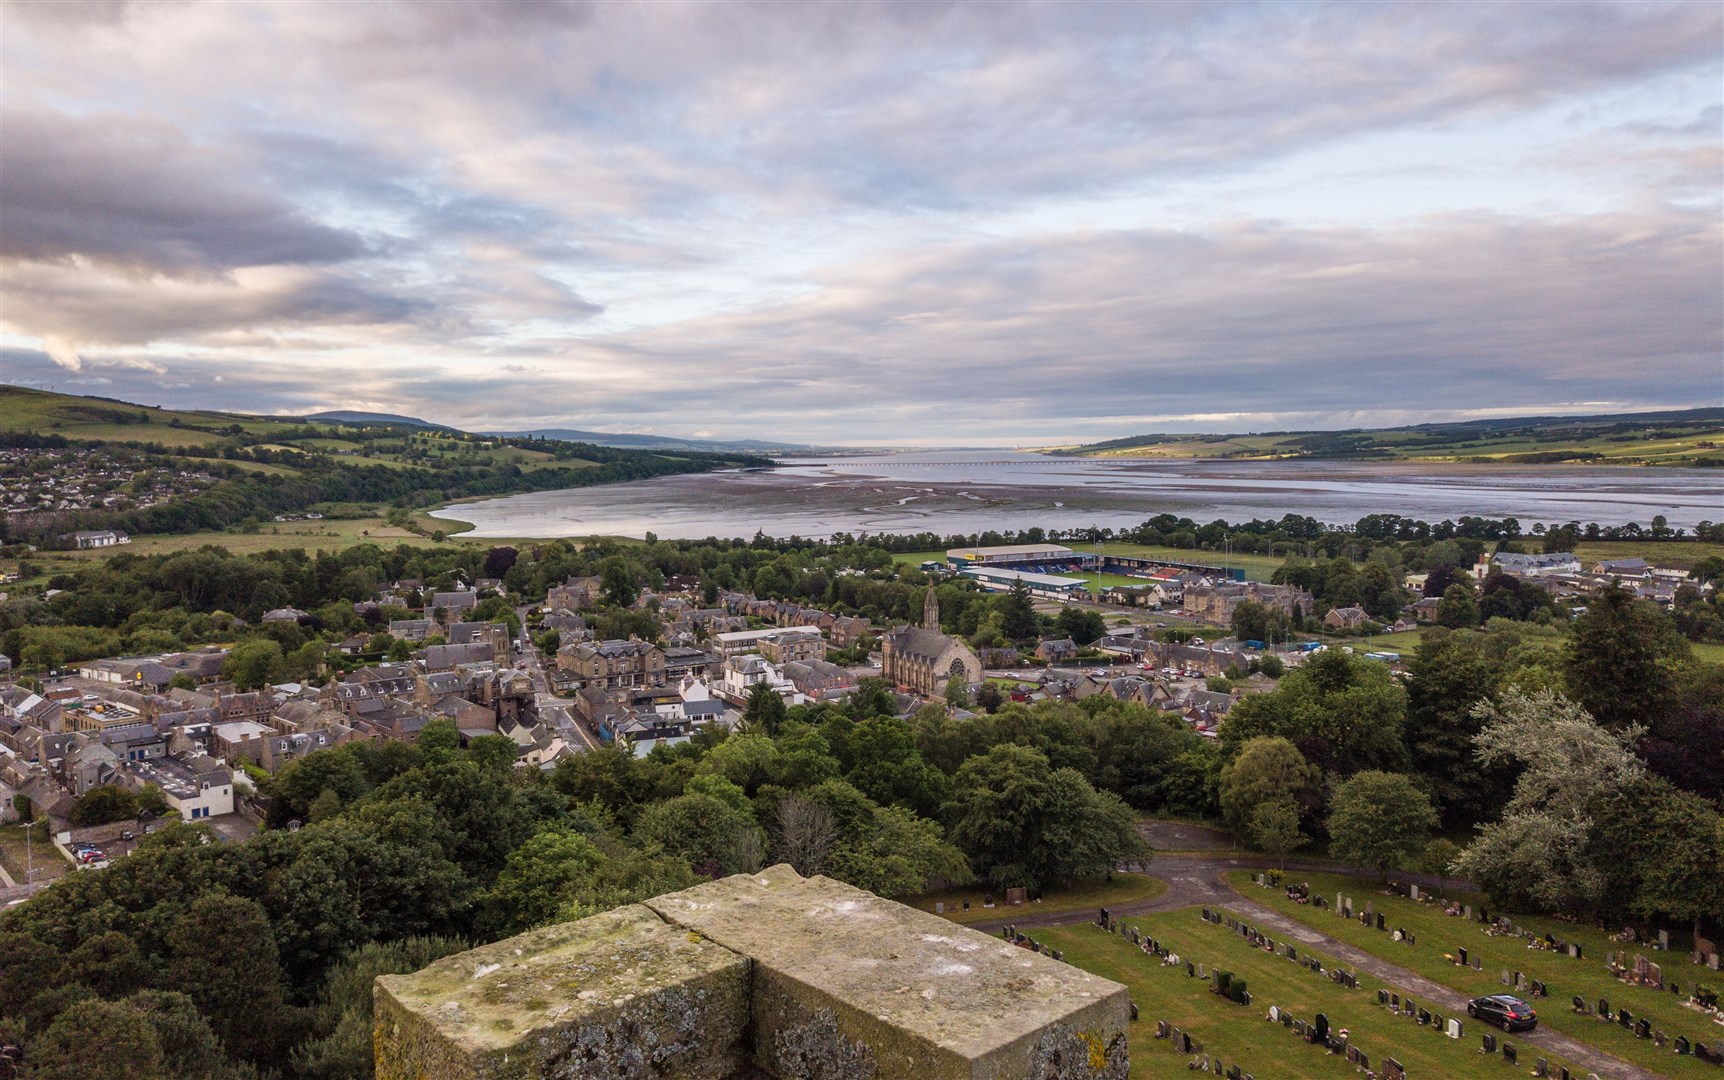 The view from the top of the tower offers a fabulous panorama for miles around.